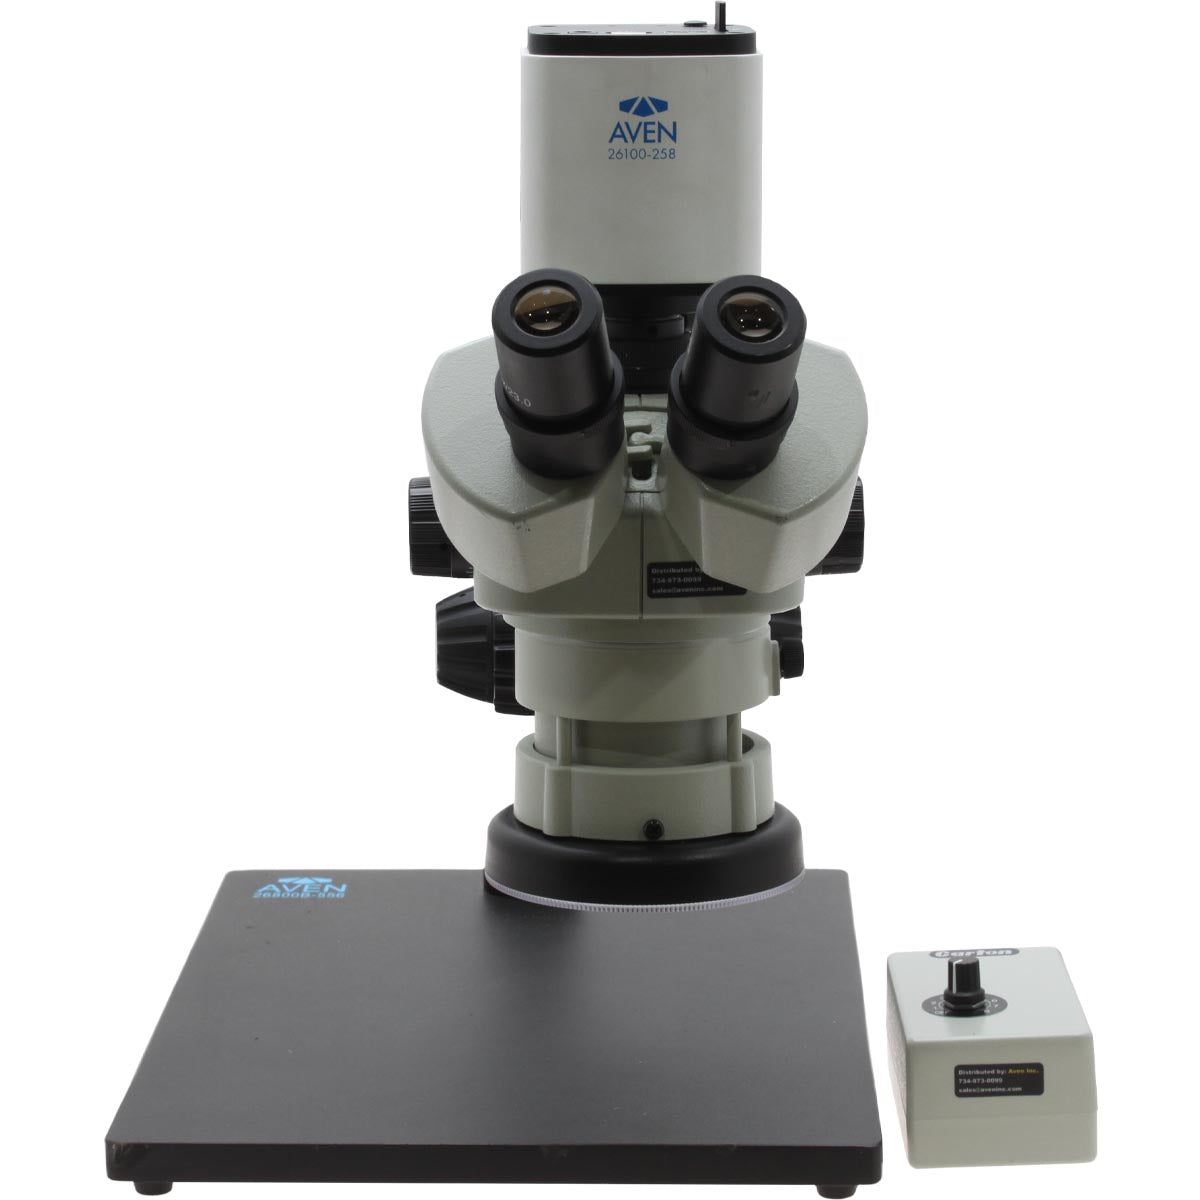 Stereo Zoom Microscope SPZV-50 [6.7x - 50x] on Ultra Glide Stand with Tiltable Arbor and Mighty Cam Pro Auto Focus Camera